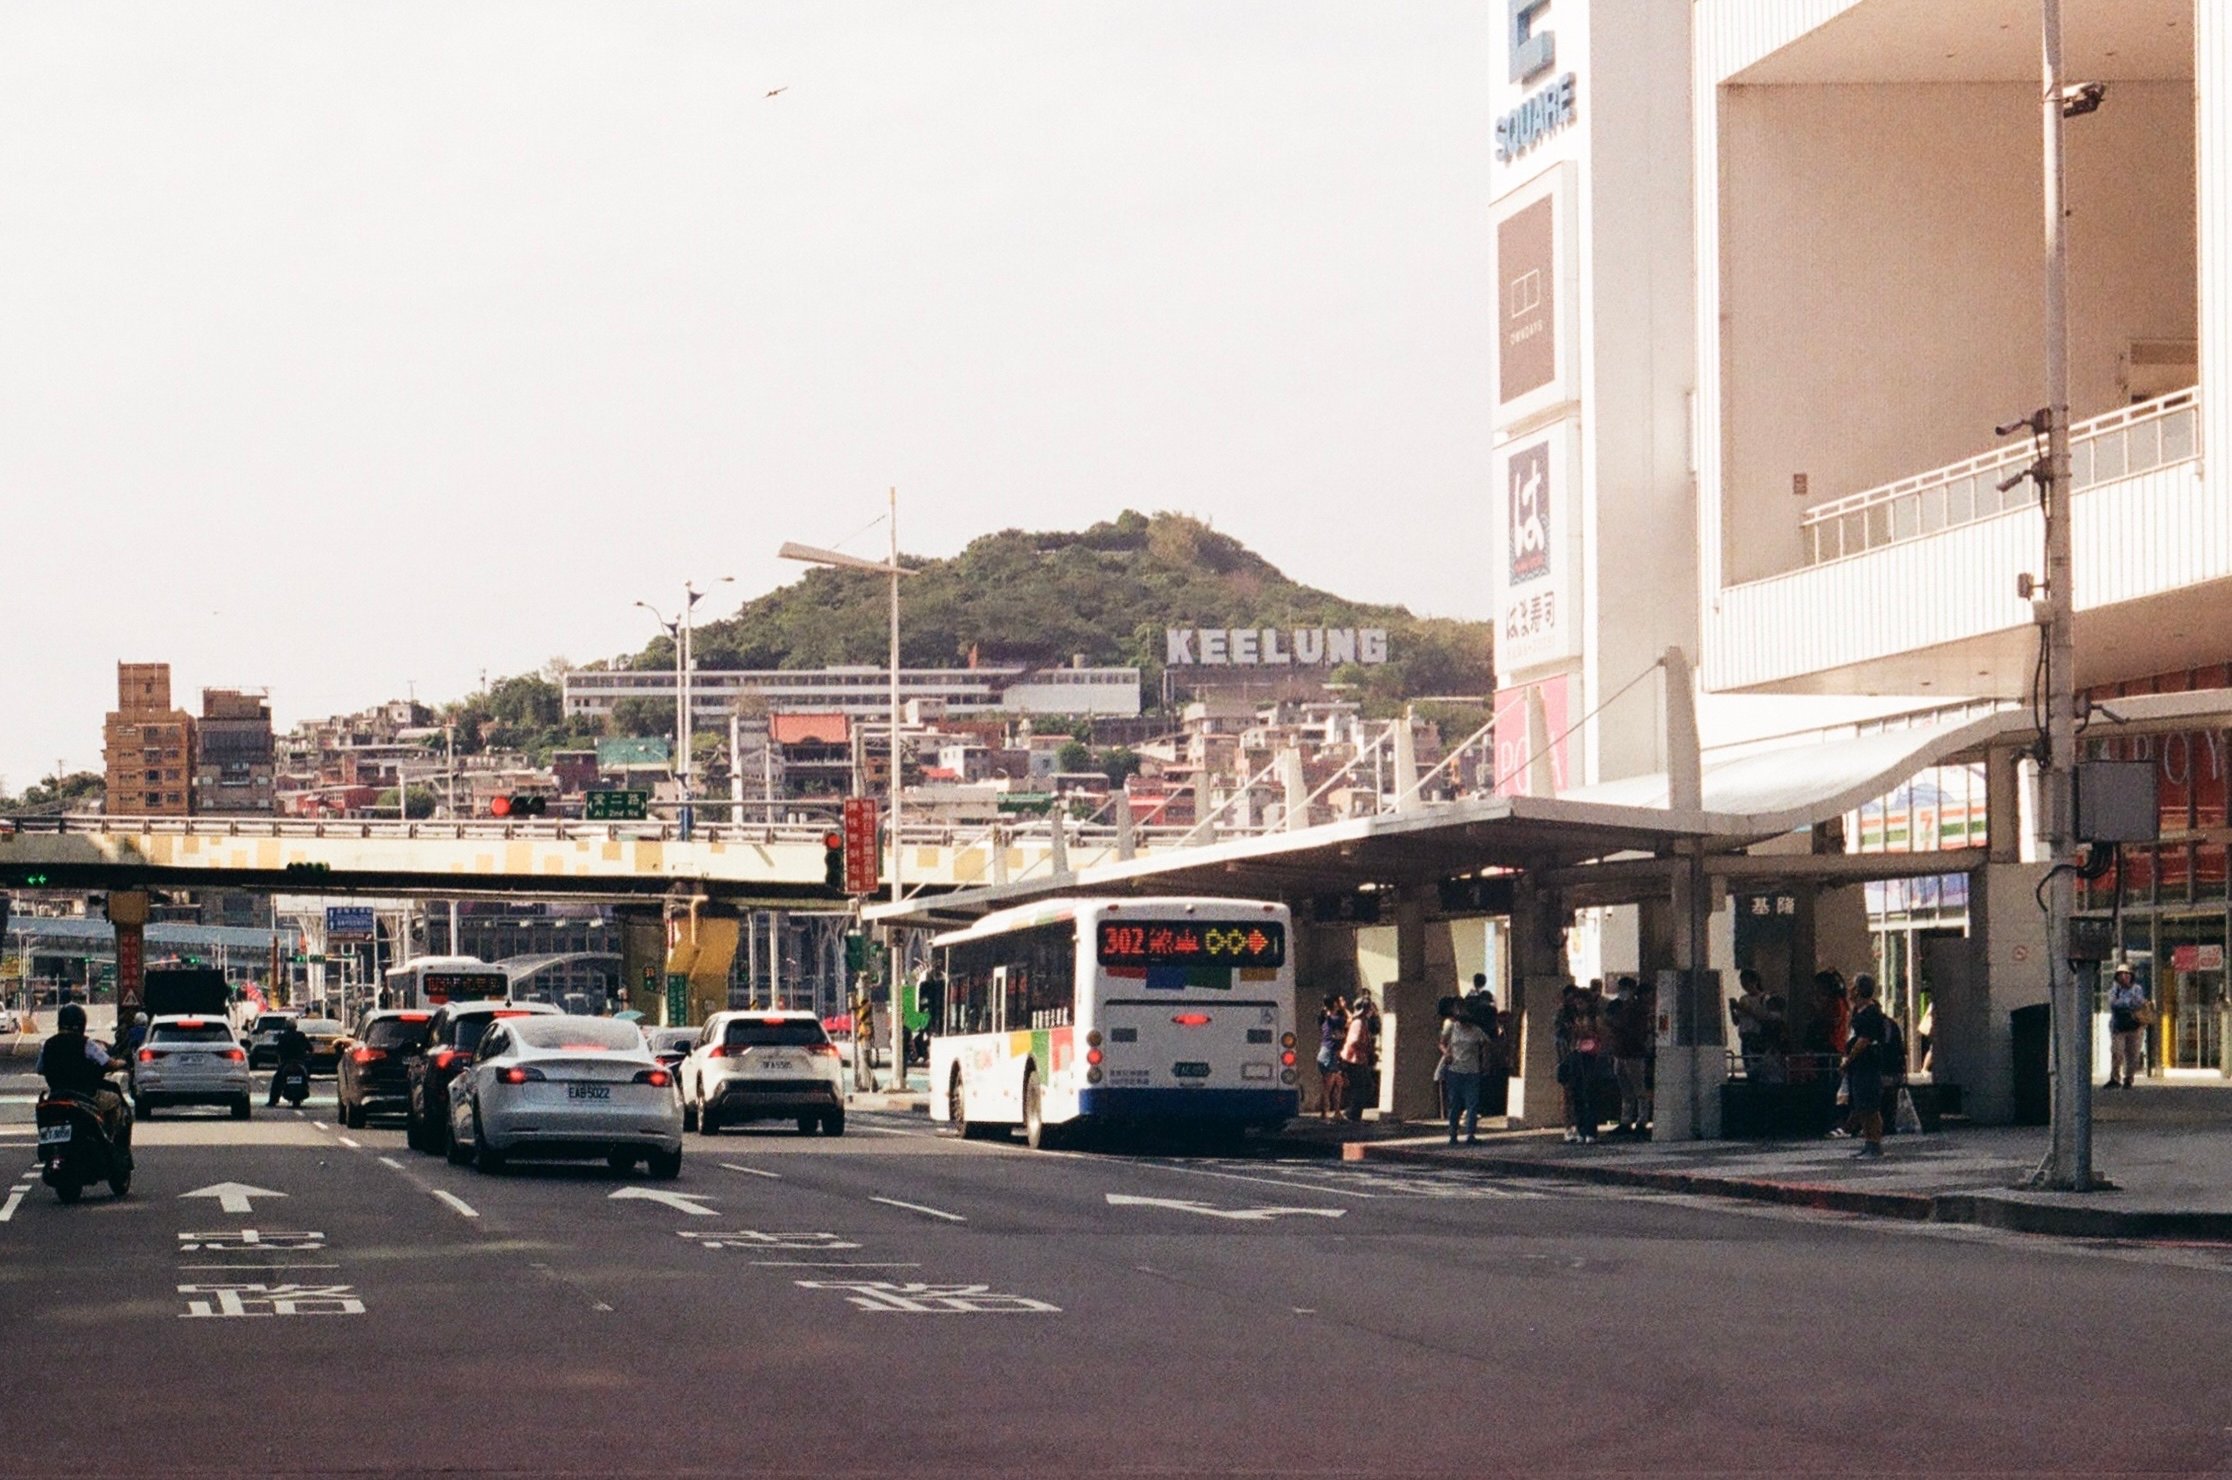 a bus and cars at a bus stop with a sign in the background on a hill reading KEELUNG